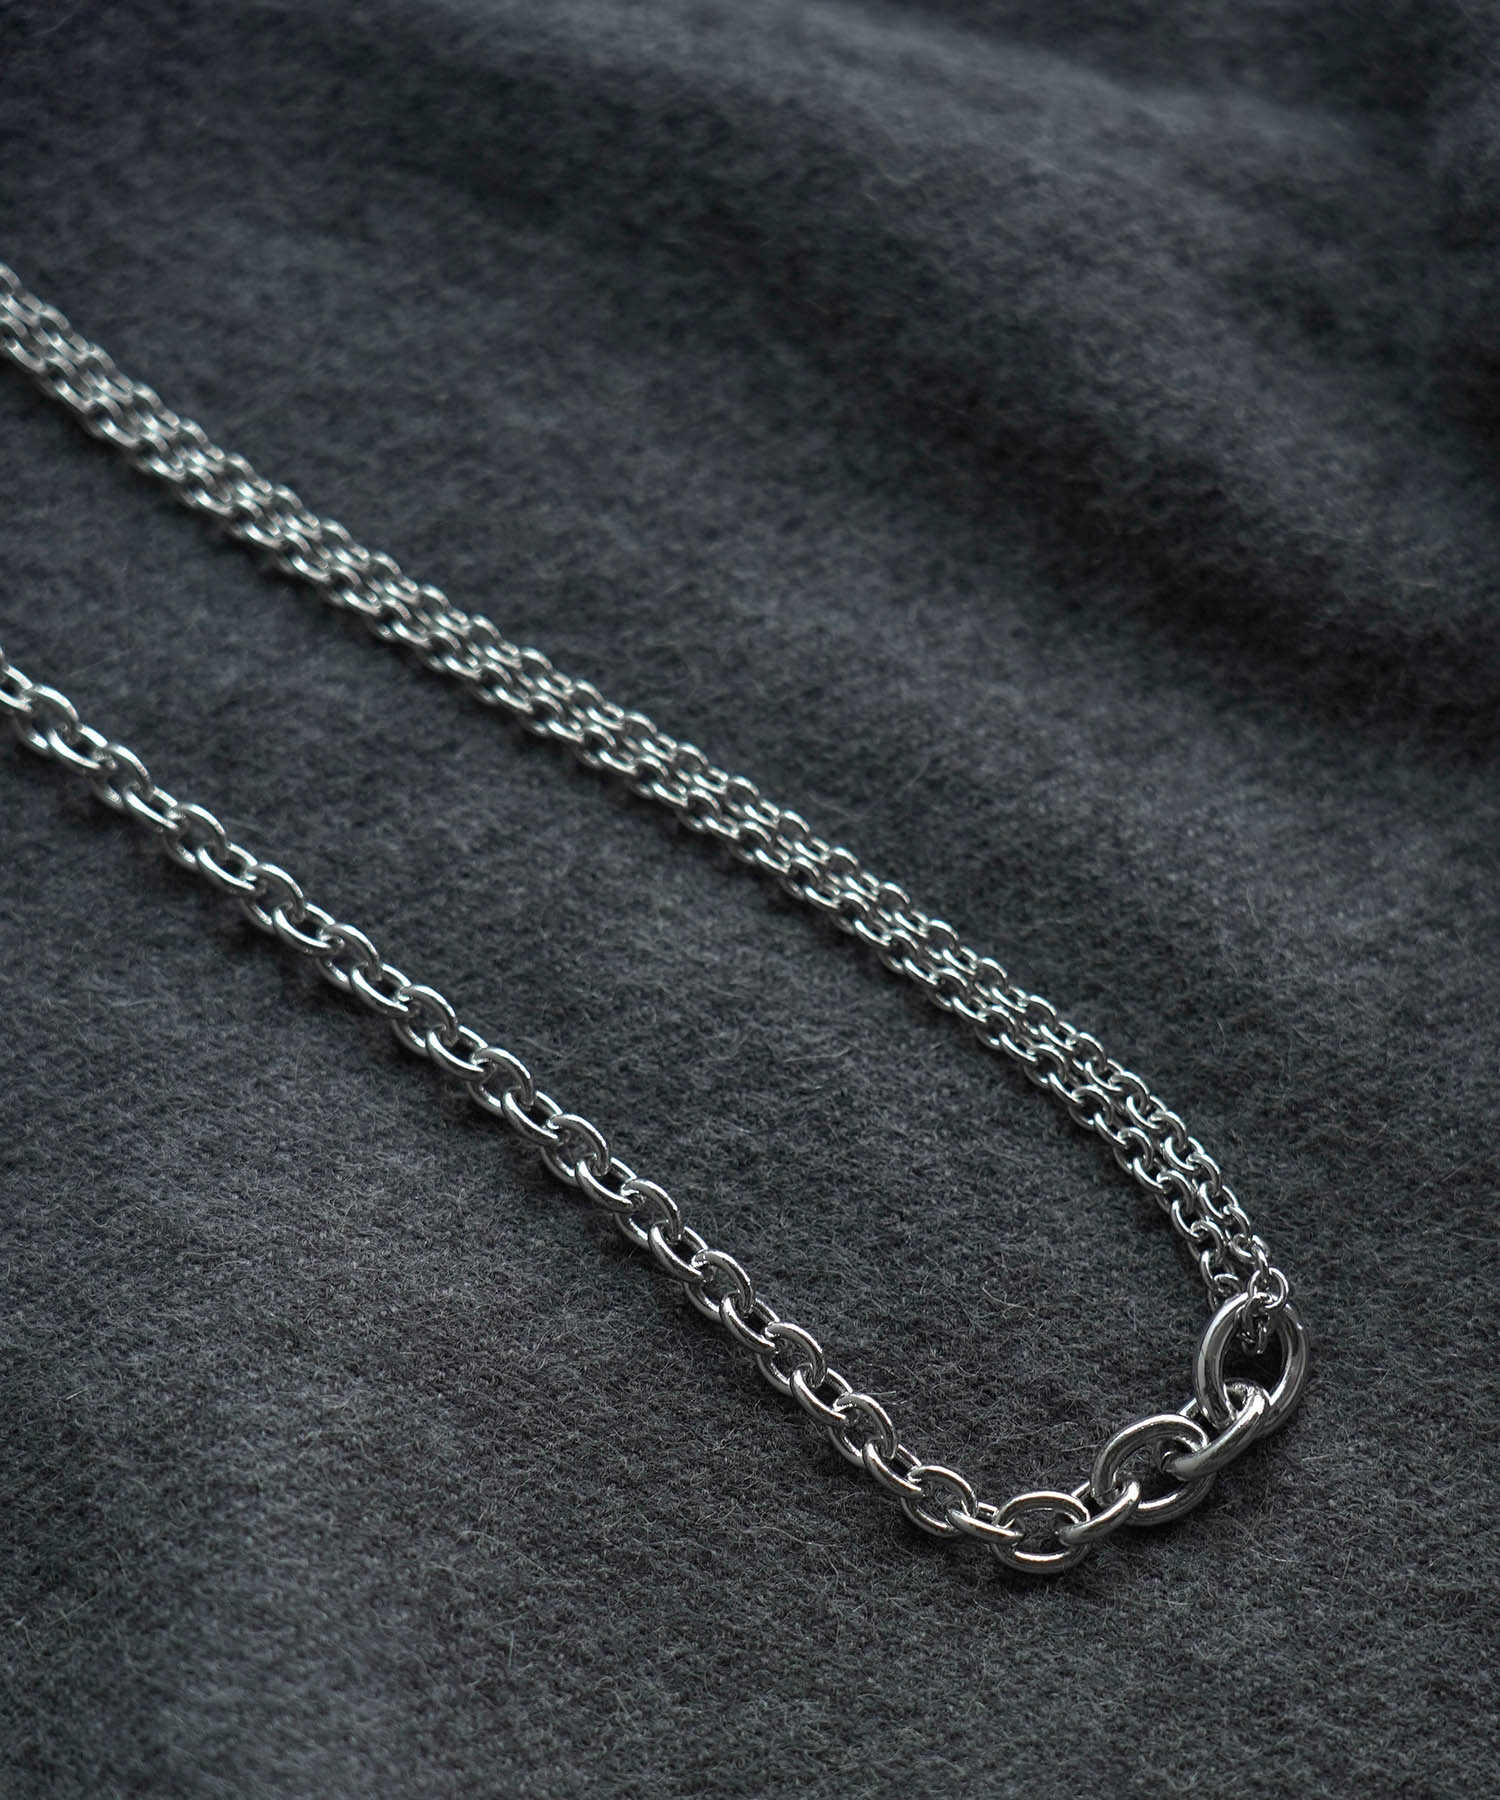 ital. from JUNRed / bean necklace connected|JUNRed(ジュンレッド)の